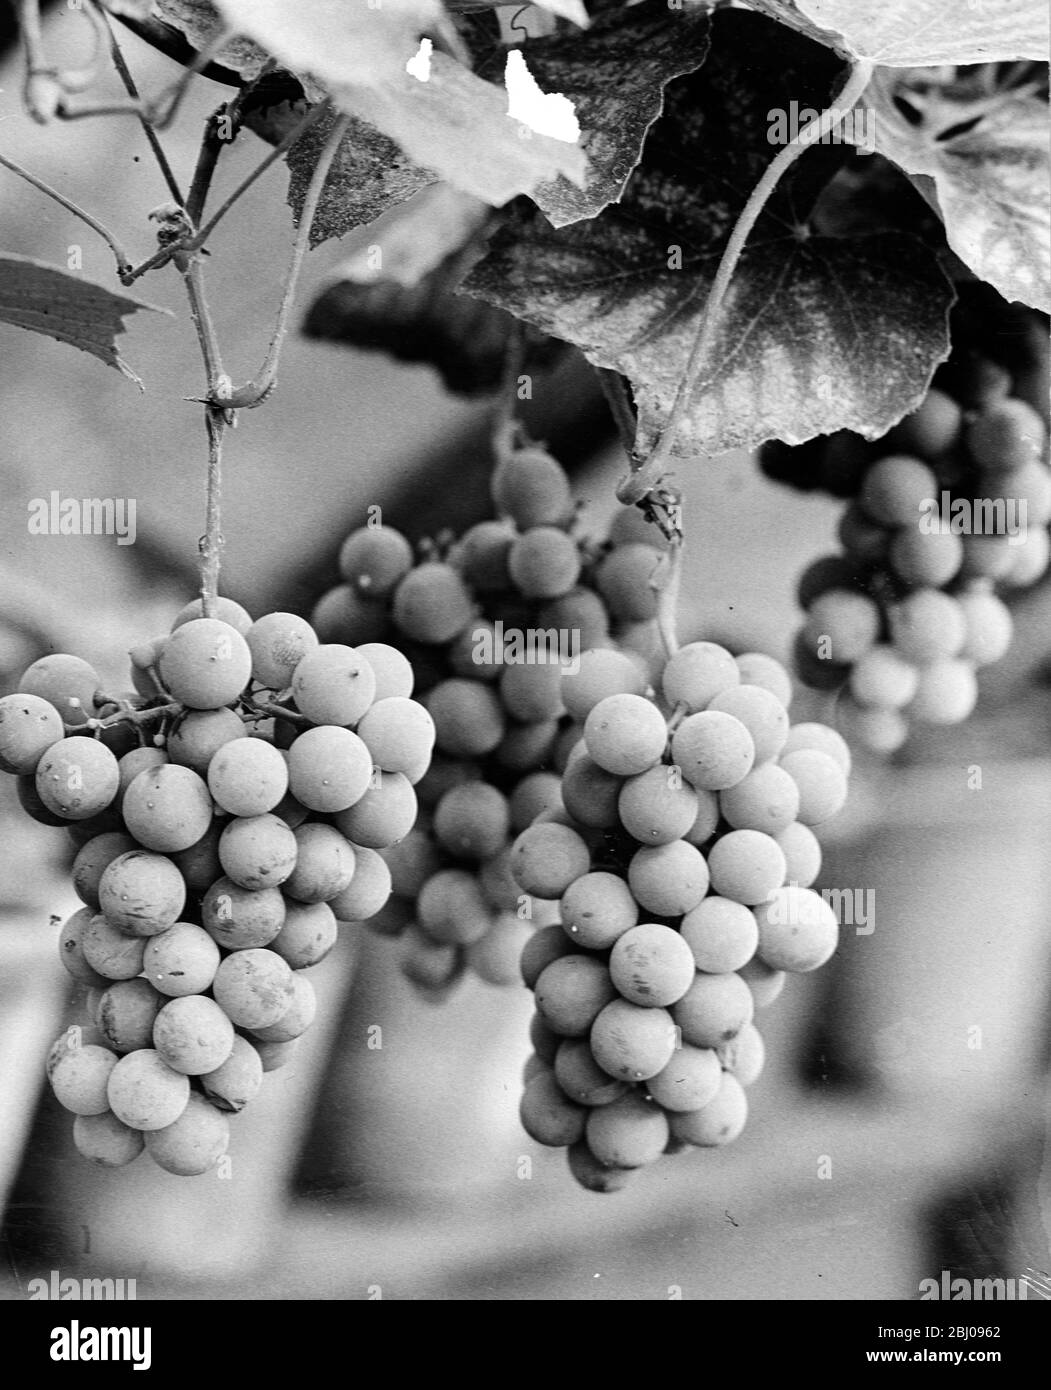 Vitis vinifera, a common grape vine, native to the Mediterranean region, central Europe, and southwestern Asia, from Morocco and Portugal north to southern Germany and east to northern Iran. Stock Photo